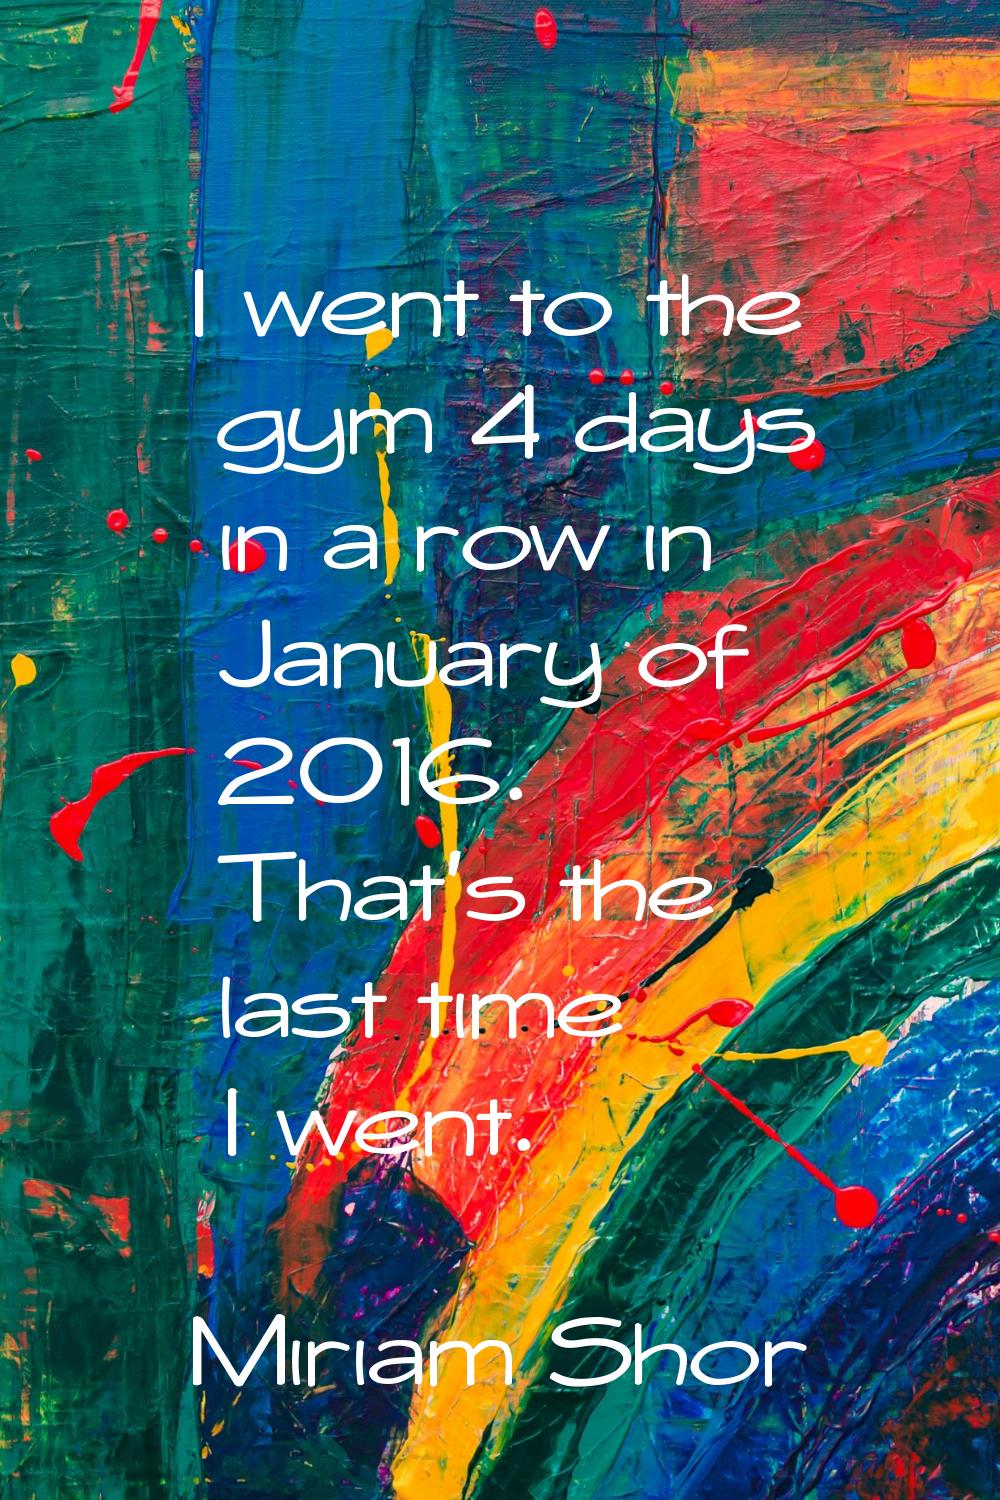 I went to the gym 4 days in a row in January of 2016. That's the last time I went.